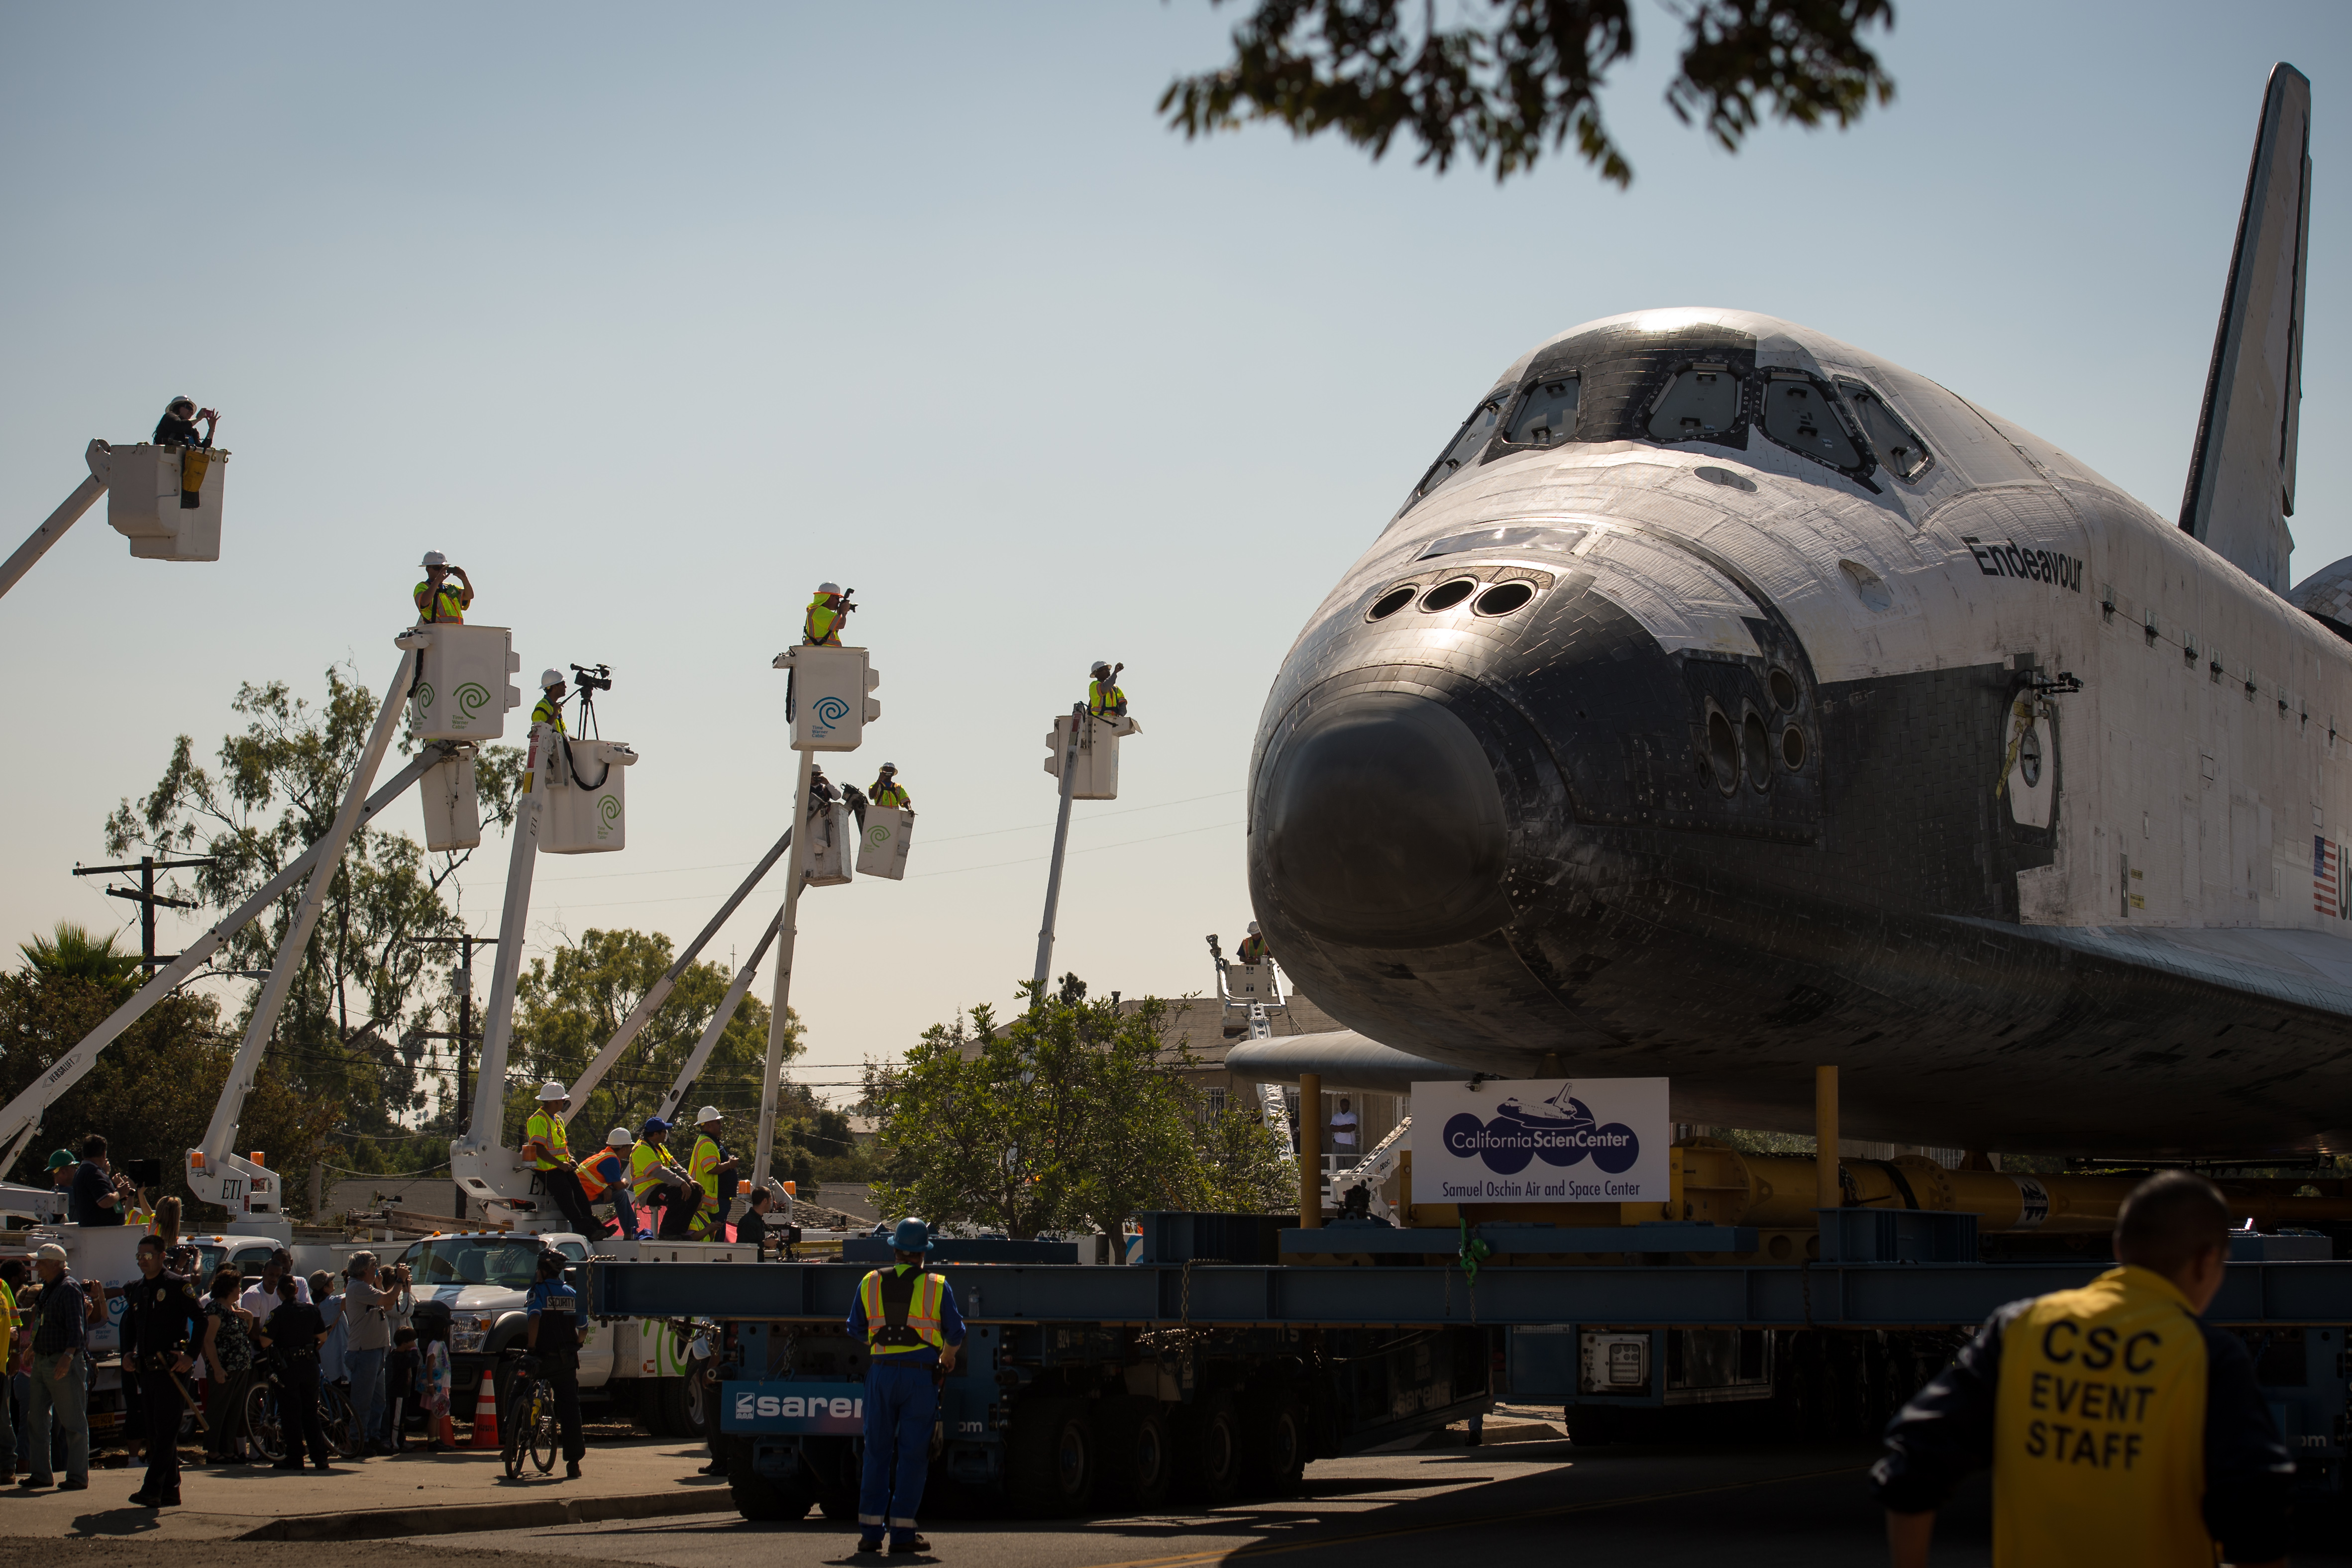 Shuttle fuel tank comes ashore in California for Endeavour museum exhibit –  Spaceflight Now